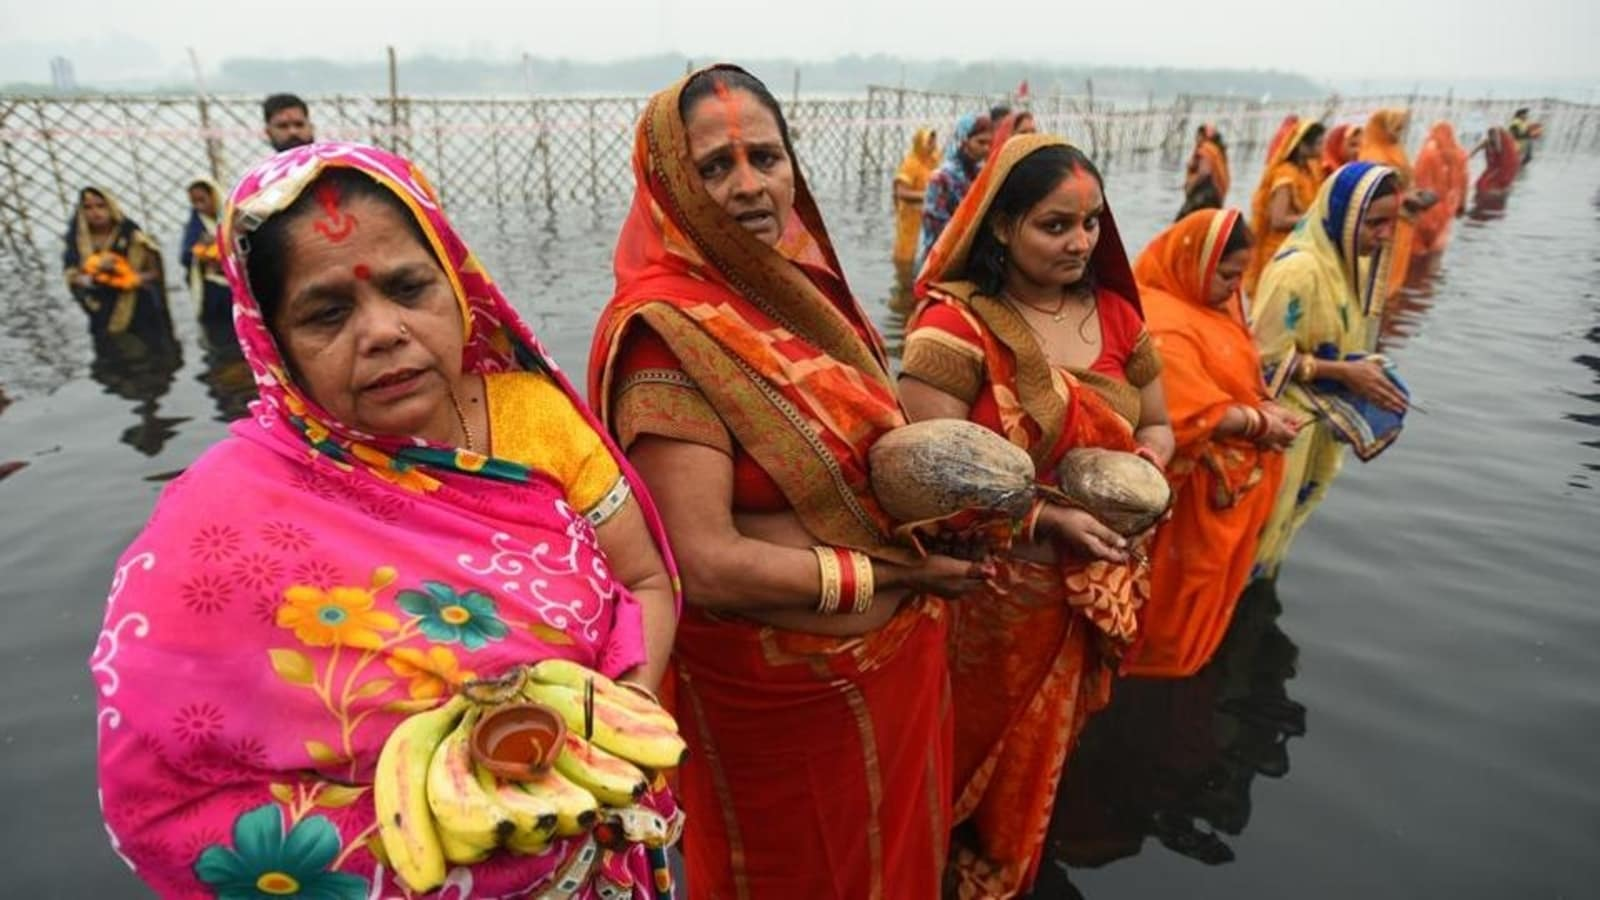 Rs 25 crore allocated for Chhath Puja